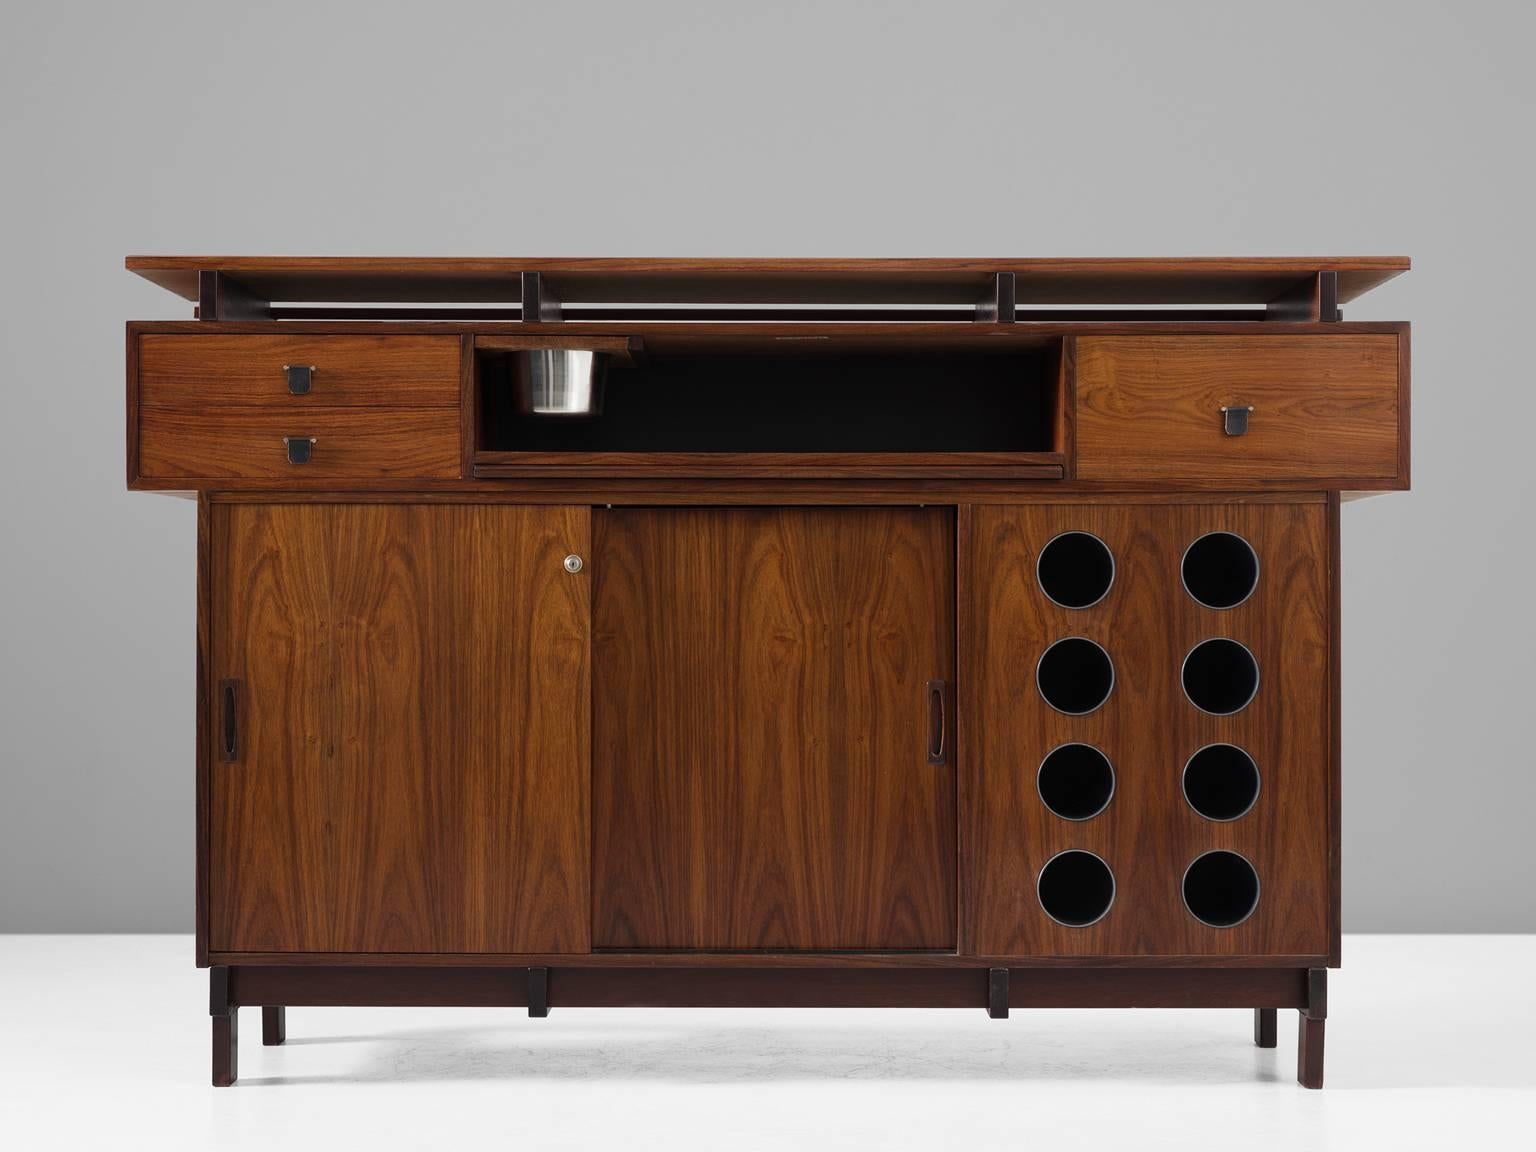 Bar cabinet, in rosewood, for Dyrlund, Denmark, 1960s. 

Well-crafted bar in rosewood, equipped with an ice holder and bottle holders. The beautiful warm rosewood grain is quite special. There are several drawers and spacious storage, which makes